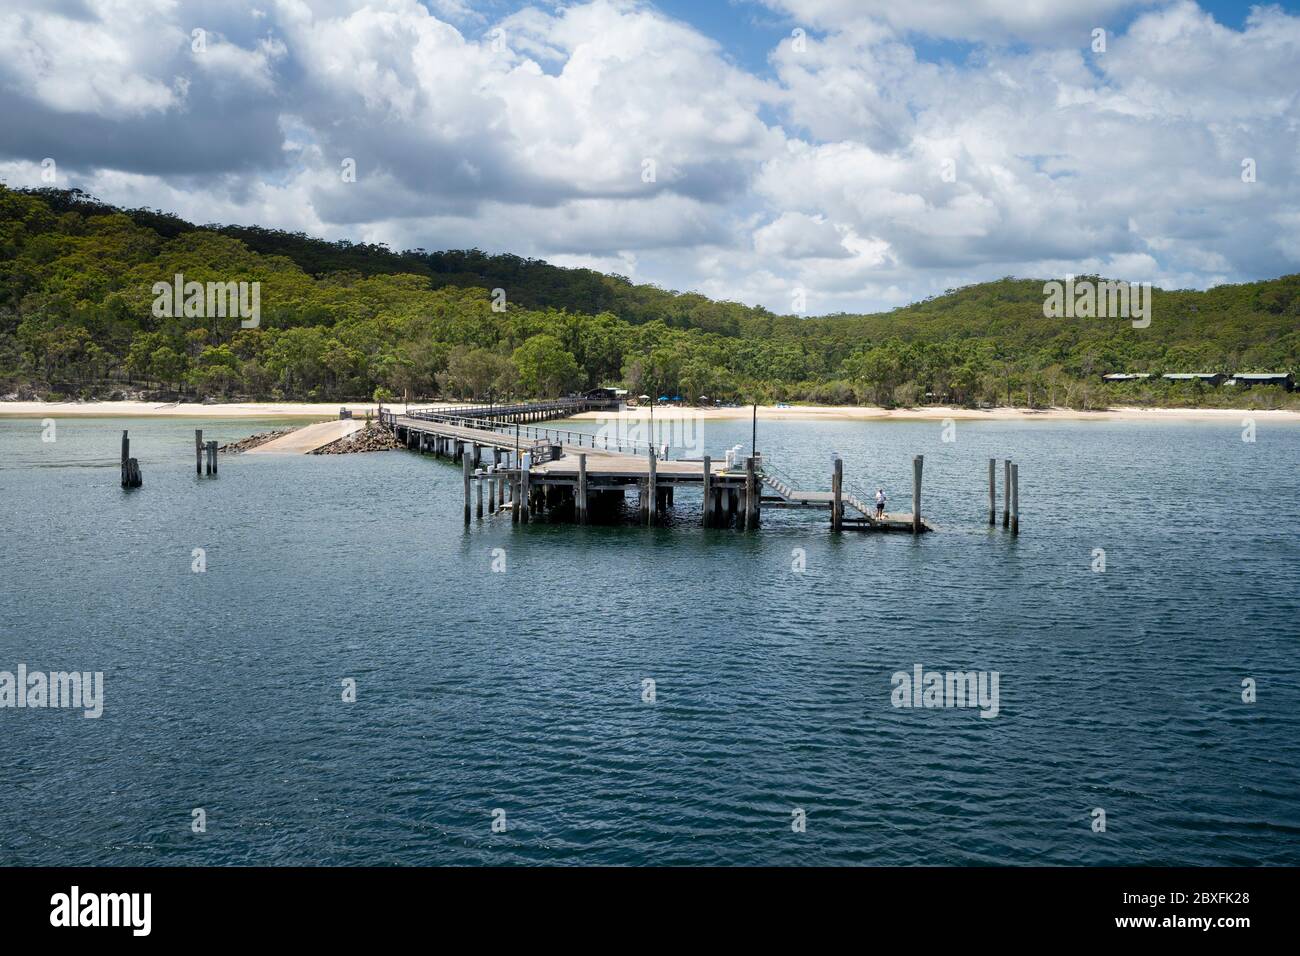 Kingfisher Bay jetty and barge landing, Fraser Island, Queensland, Australia Stock Photo